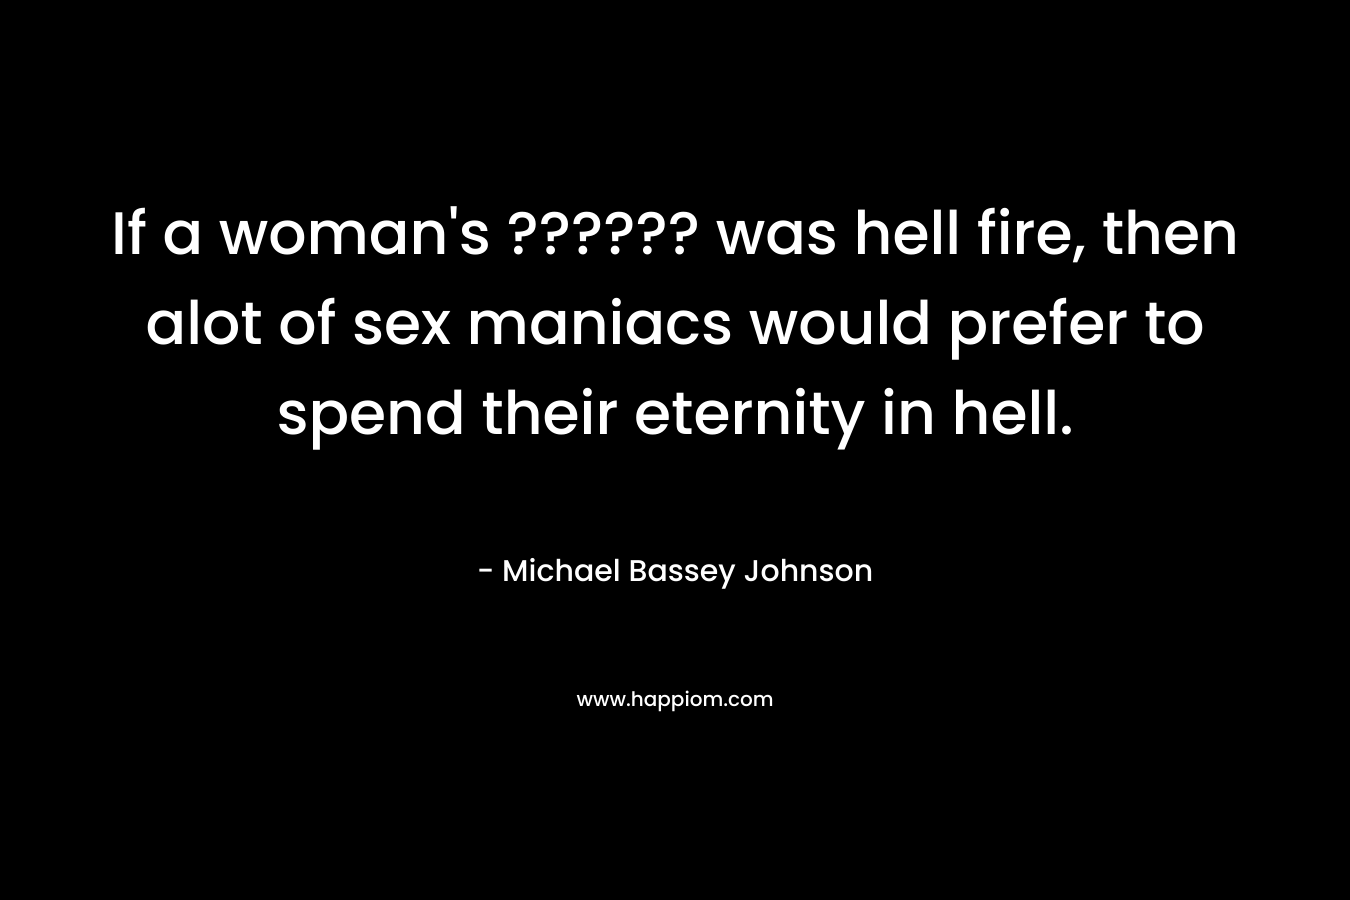 If a woman's ?????? was hell fire, then alot of sex maniacs would prefer to spend their eternity in hell.